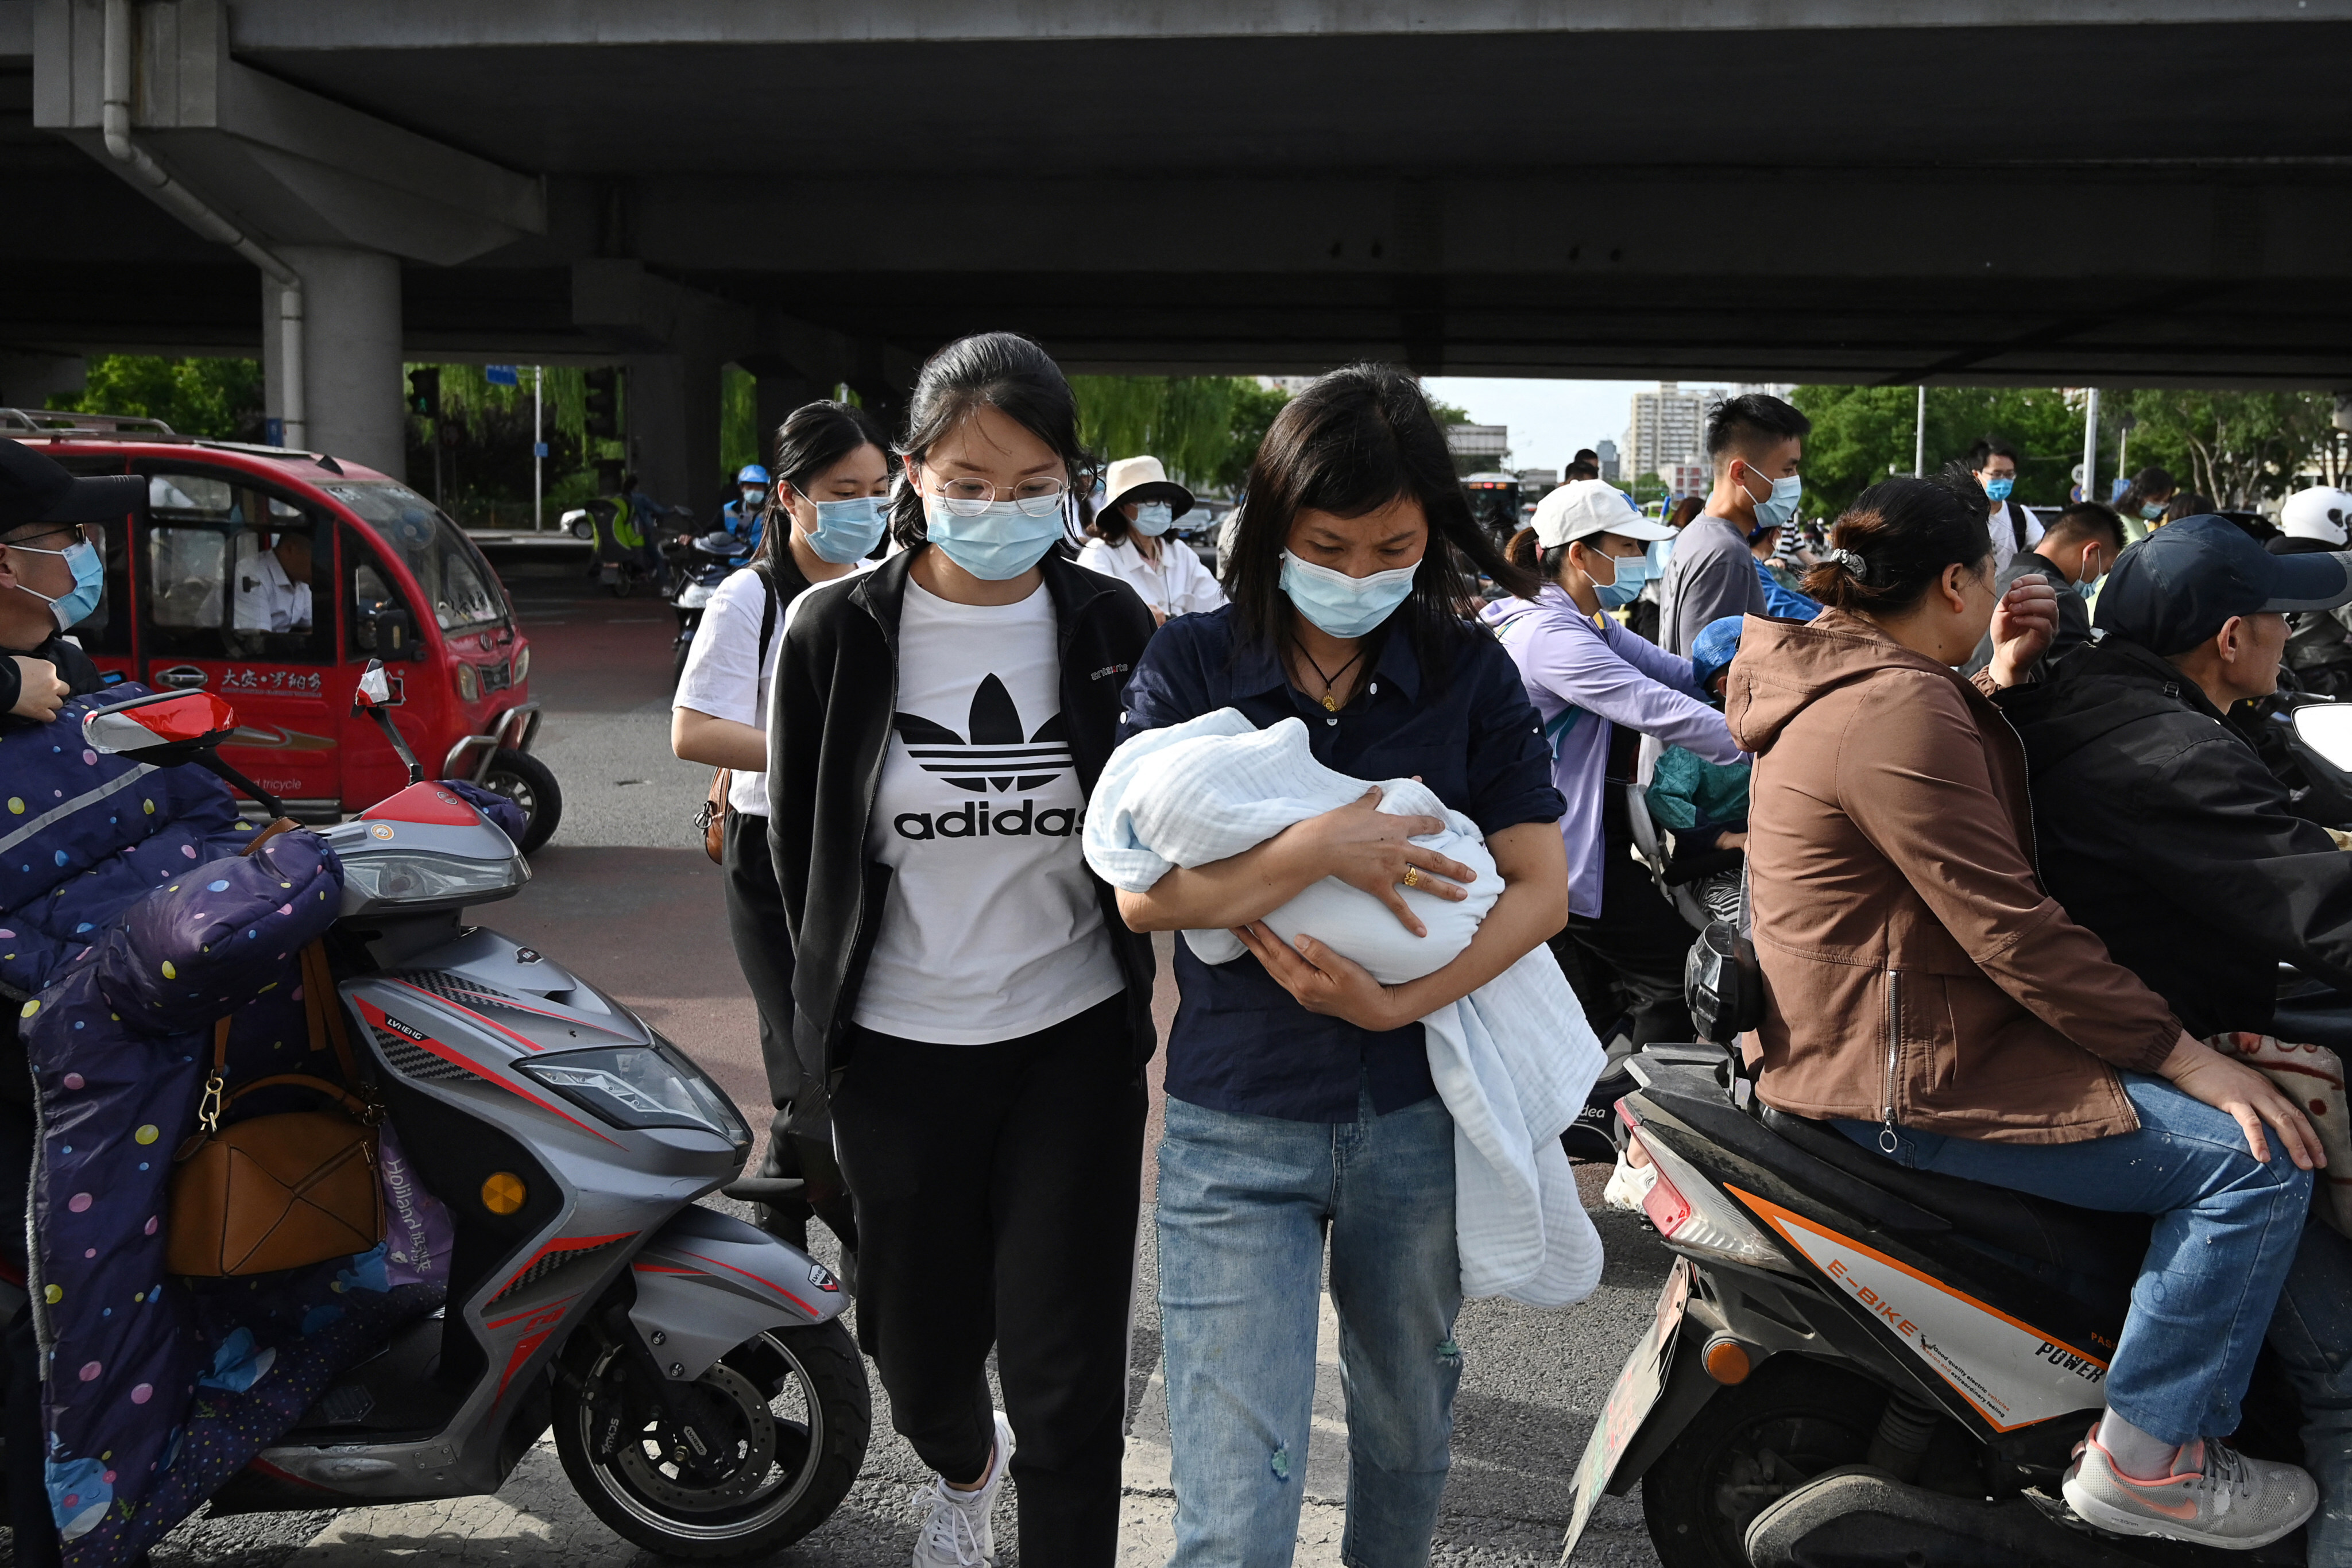 A woman carries a baby through a busy intersection in Beijing on June 2, 2021, days after China announced it would allow couples to have three children. Photo: AFP